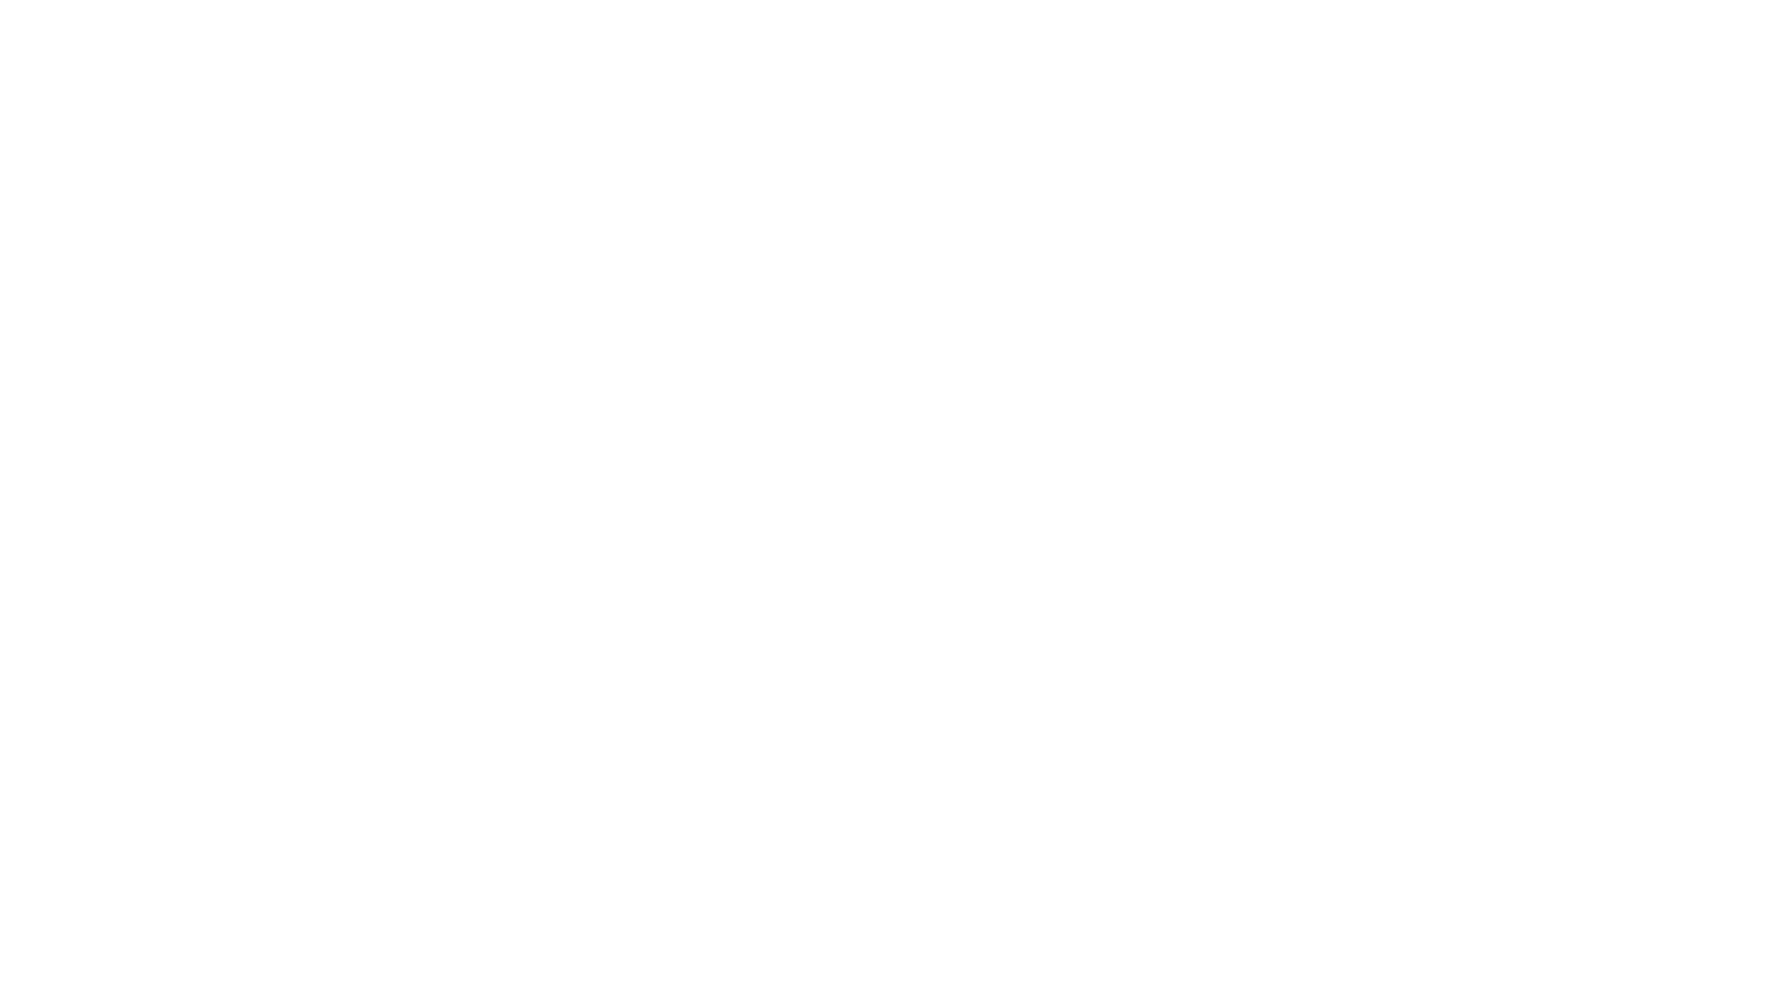 2022 Coming Together For Action Conference Logo